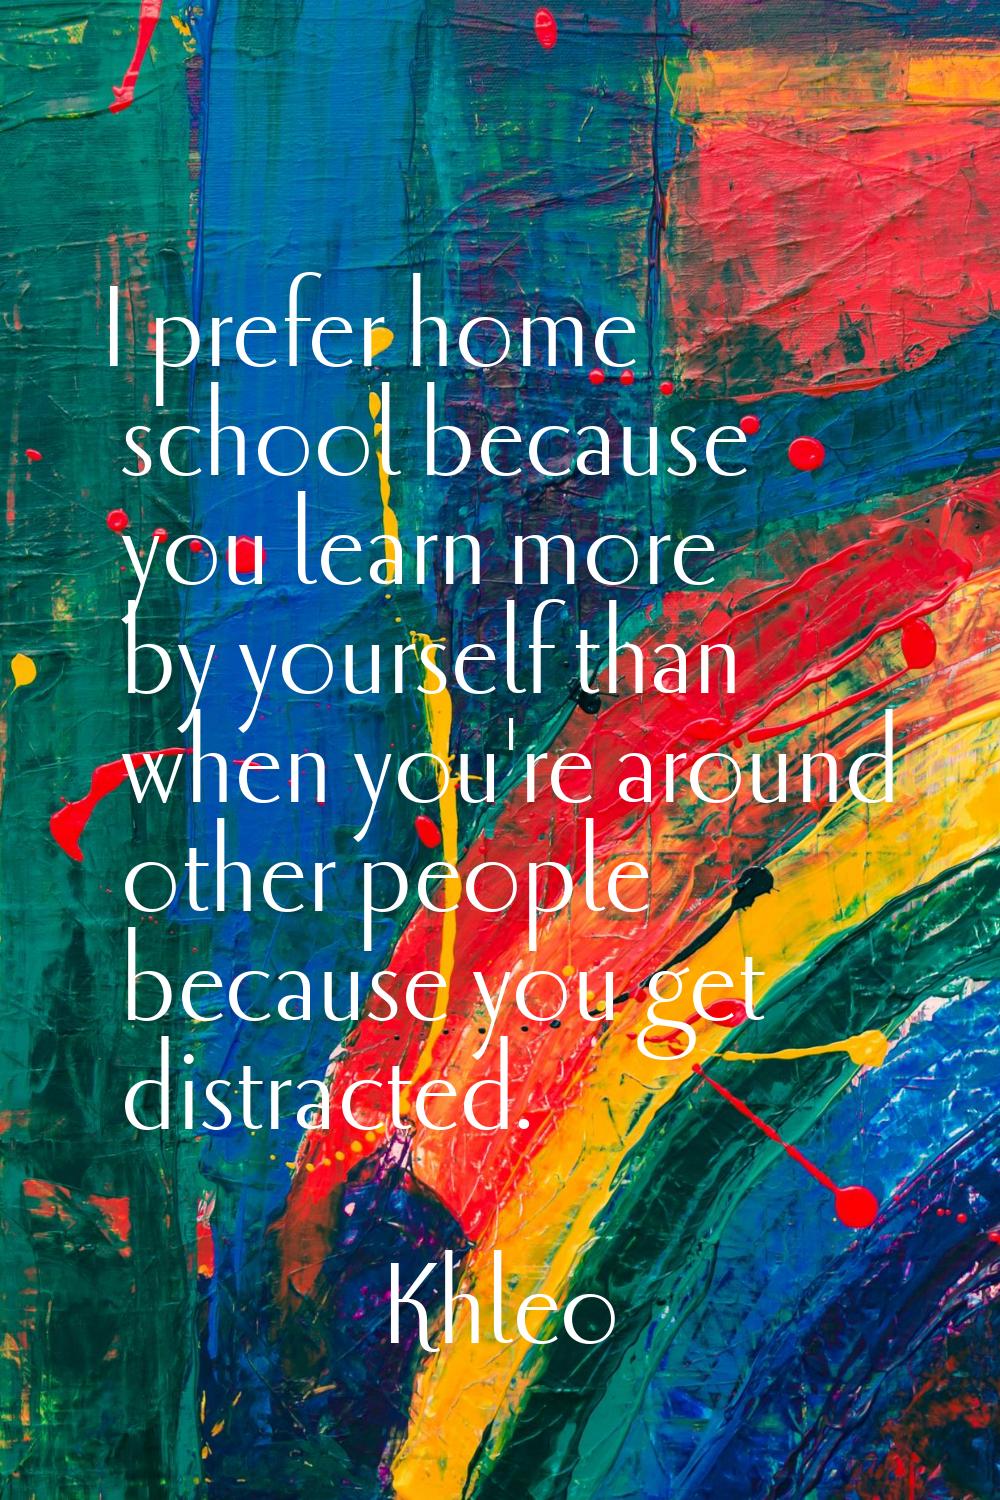 I prefer home school because you learn more by yourself than when you're around other people becaus